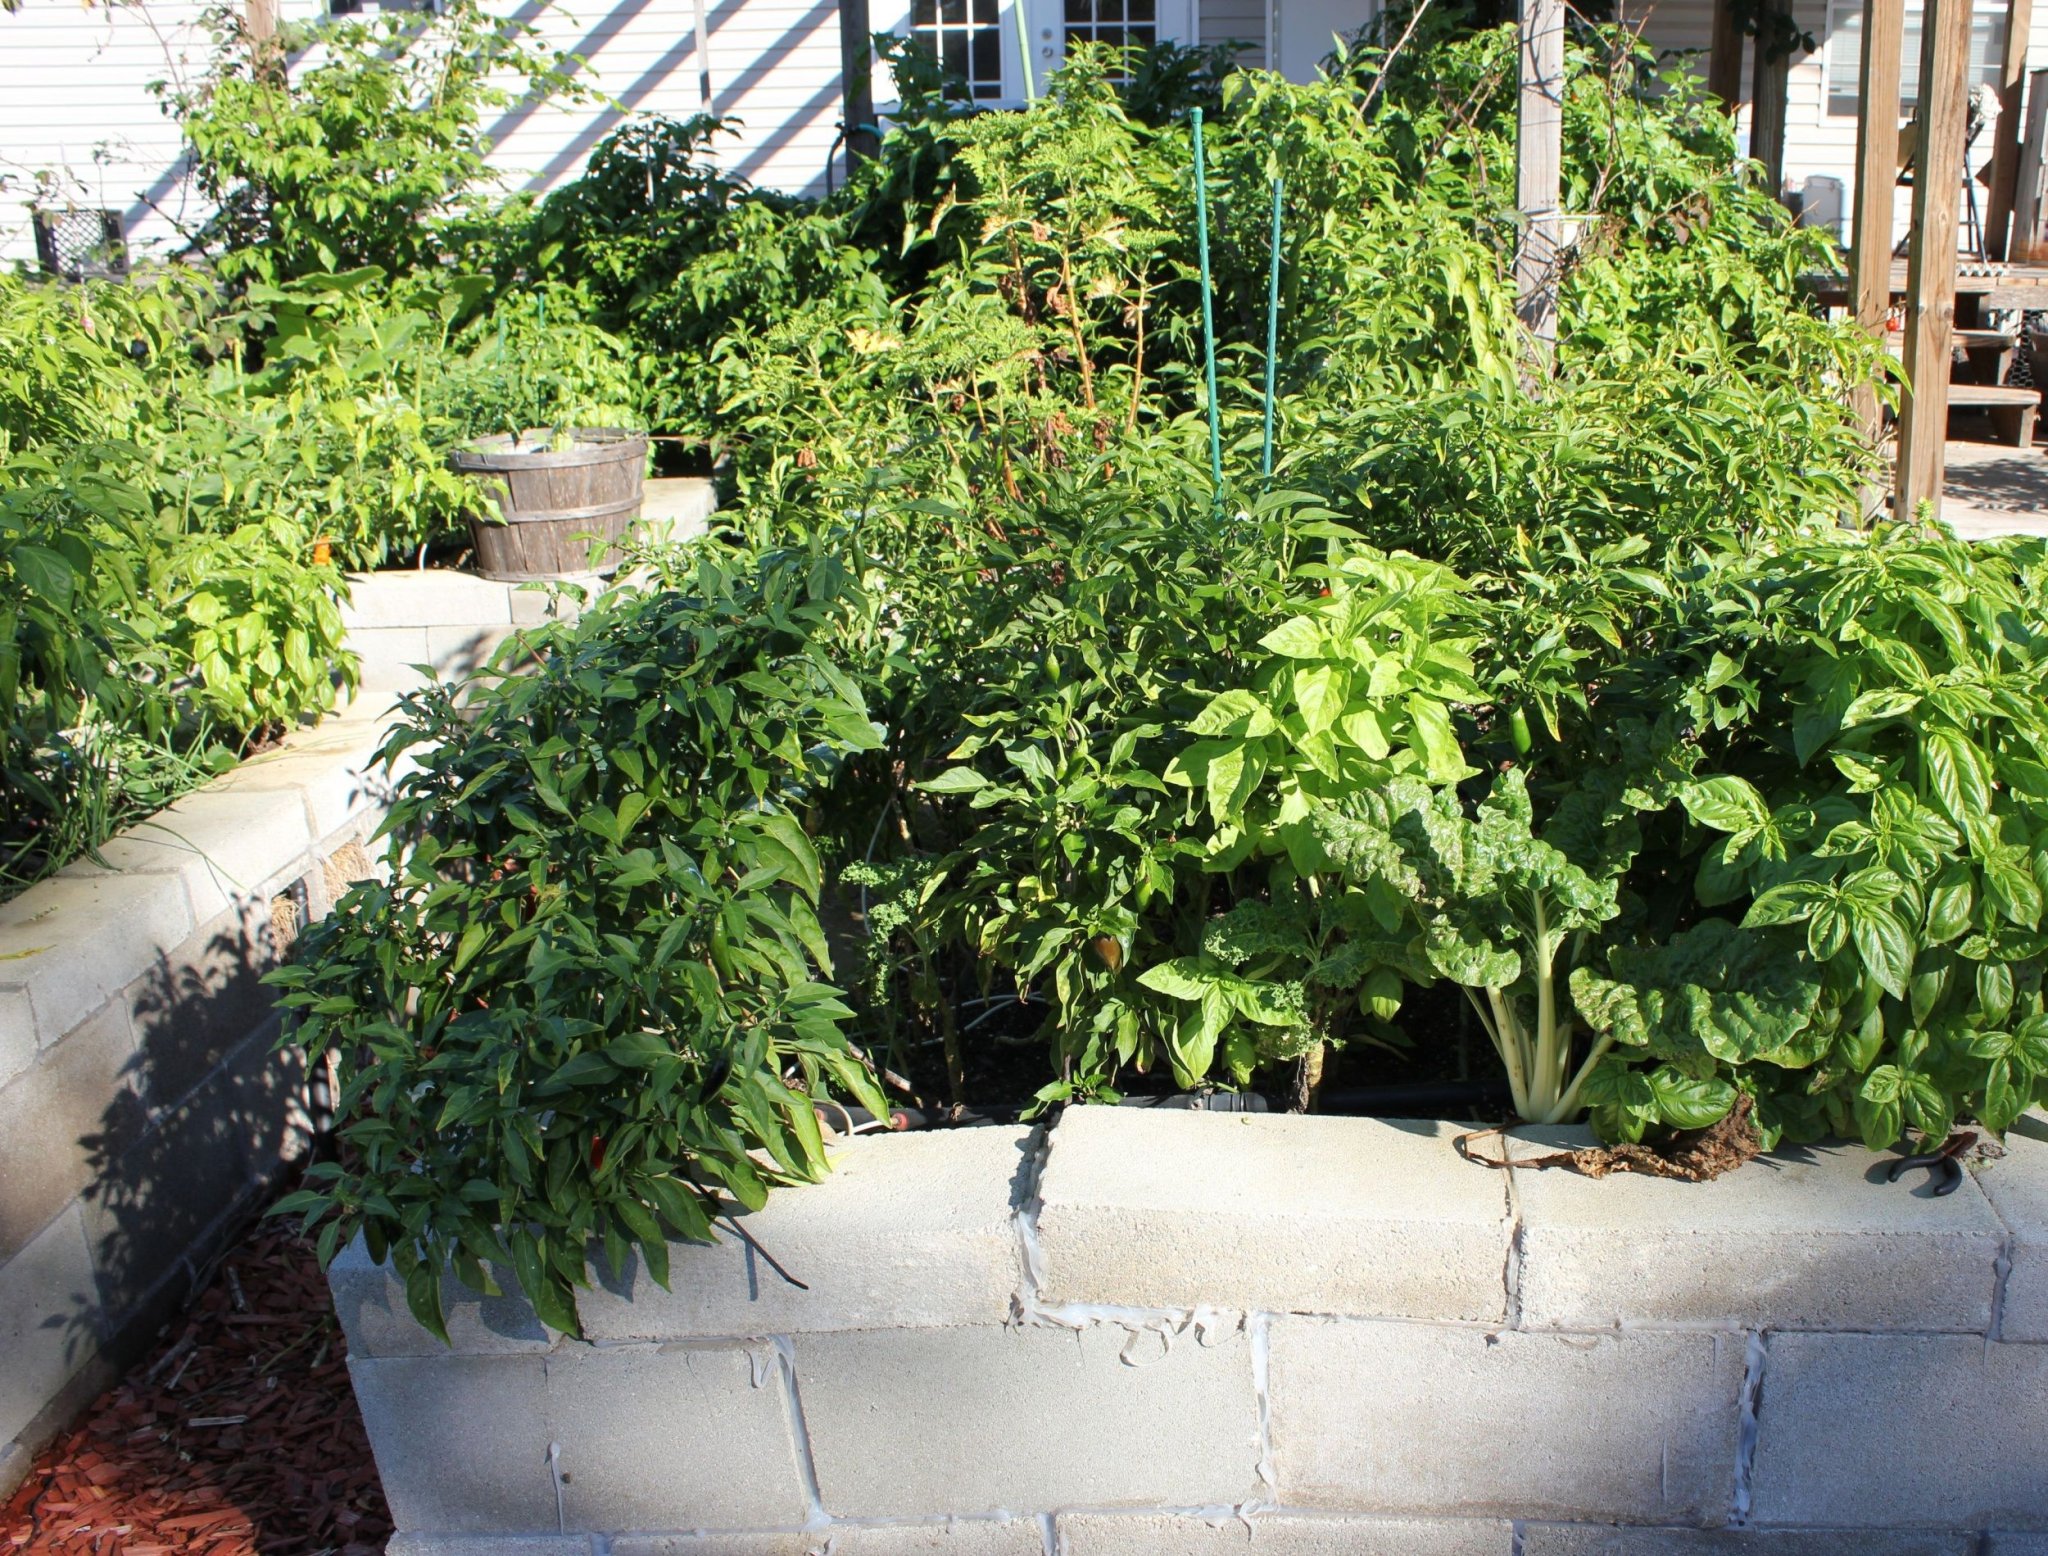 5 Raised Garden Bed Materials You Should Never Use